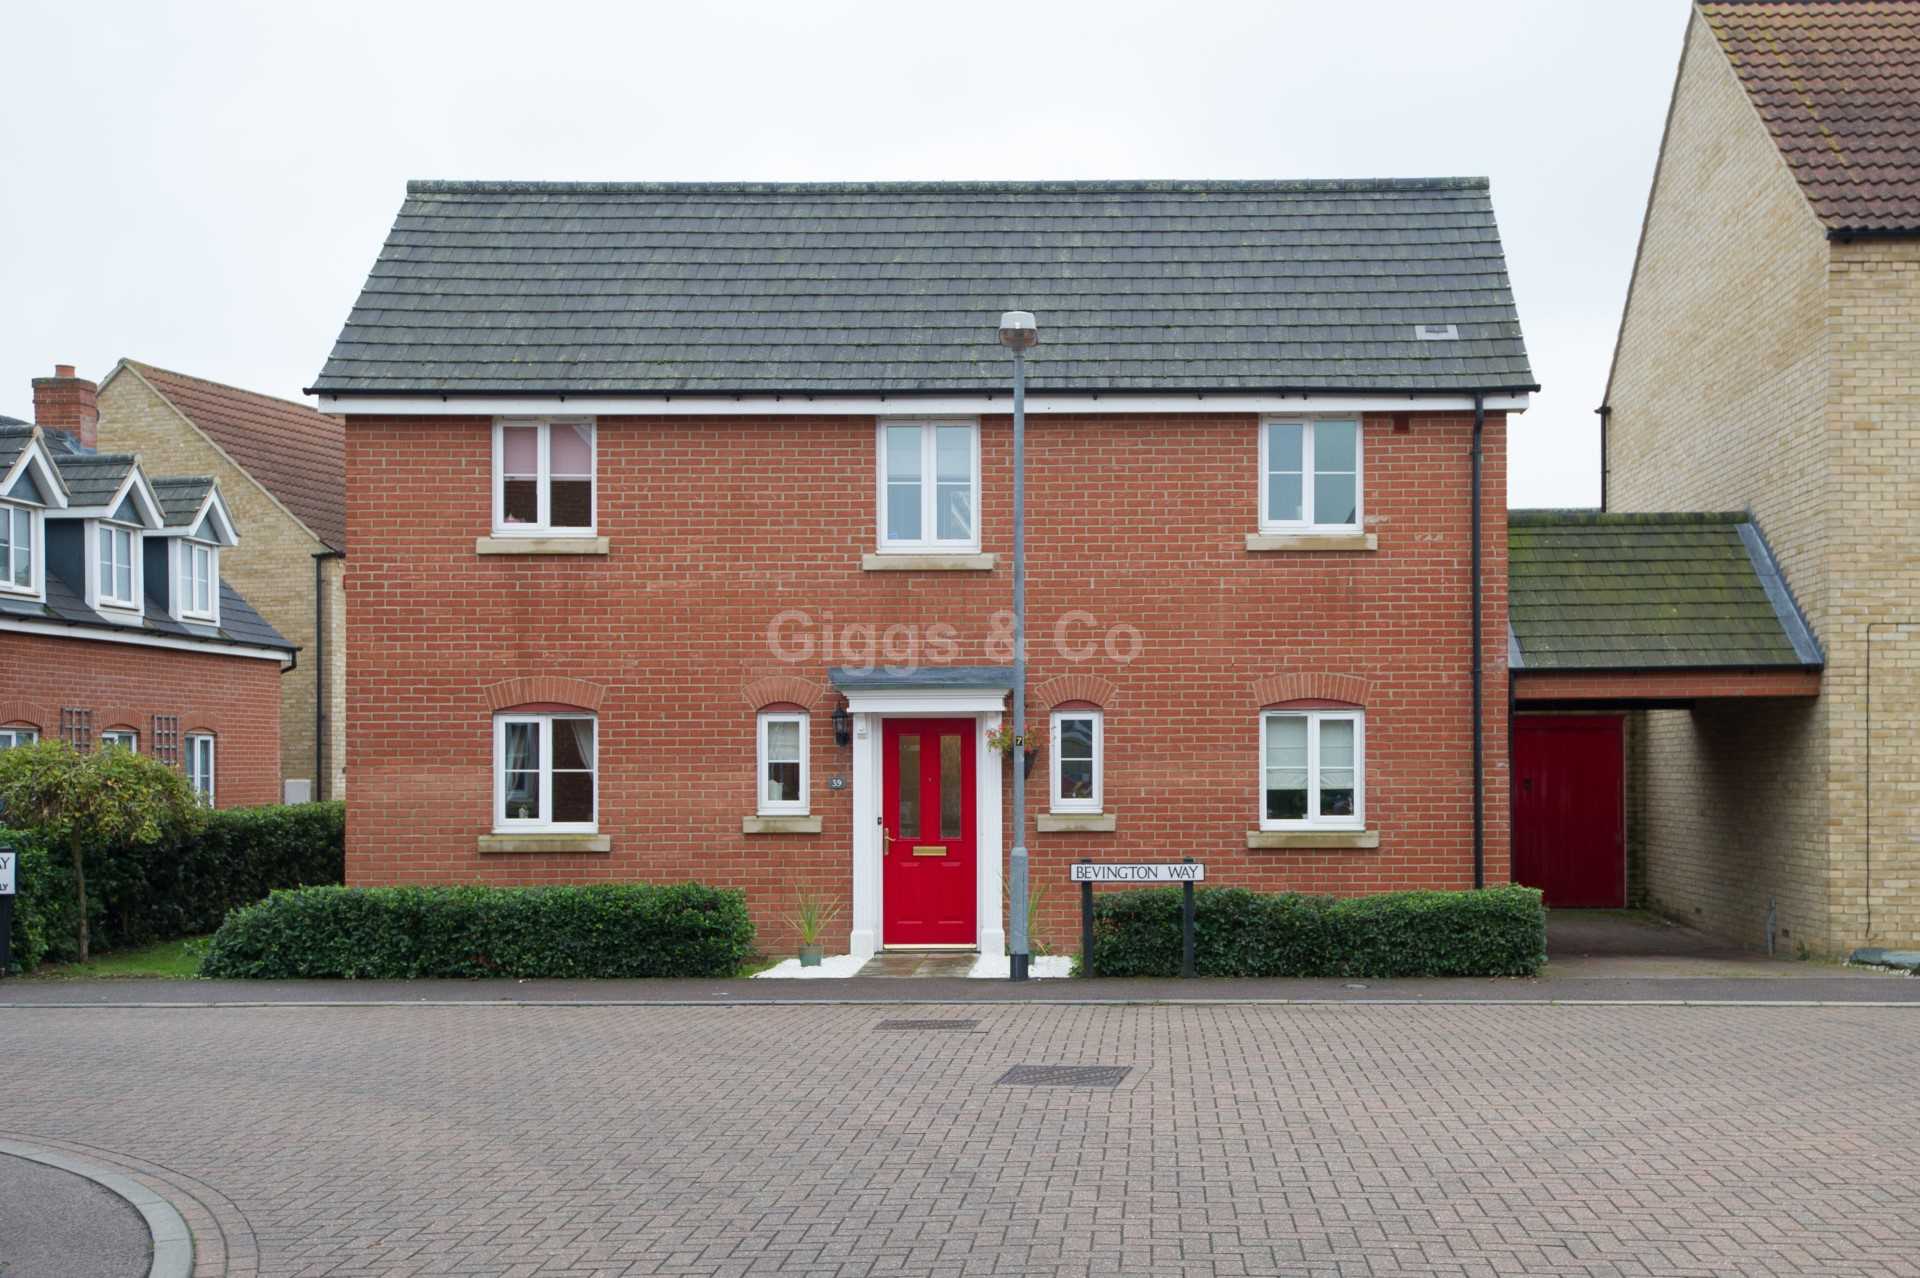 4 bed detached house to rent in Bevington Way, St Neots, PE19